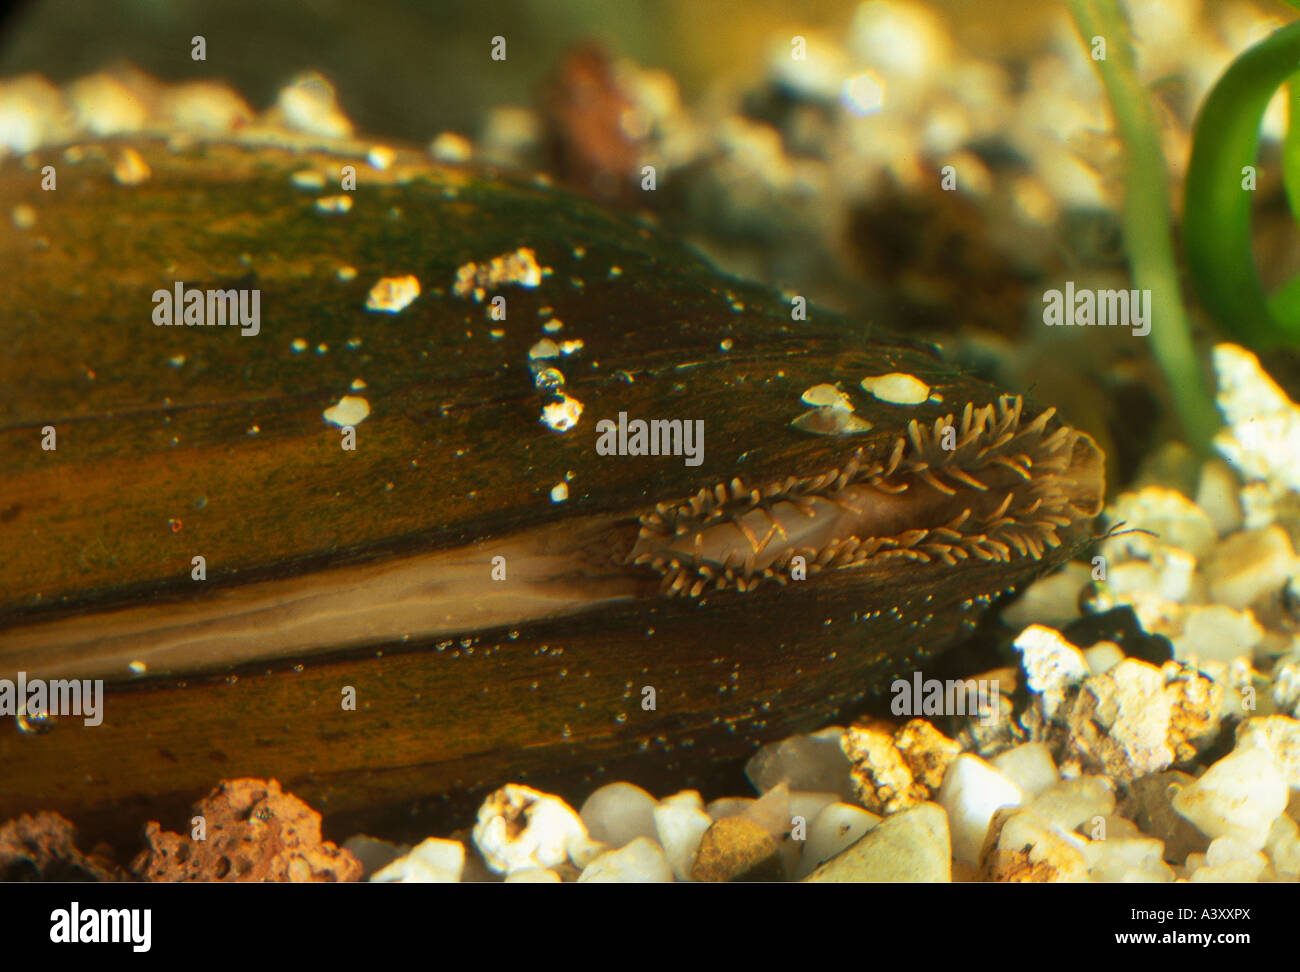 zoology / animals, cnidaria, Swan mussel, (Anodonta cygnea), underwater shot, detail: mouth, distribution: North- and Central Eu Stock Photo